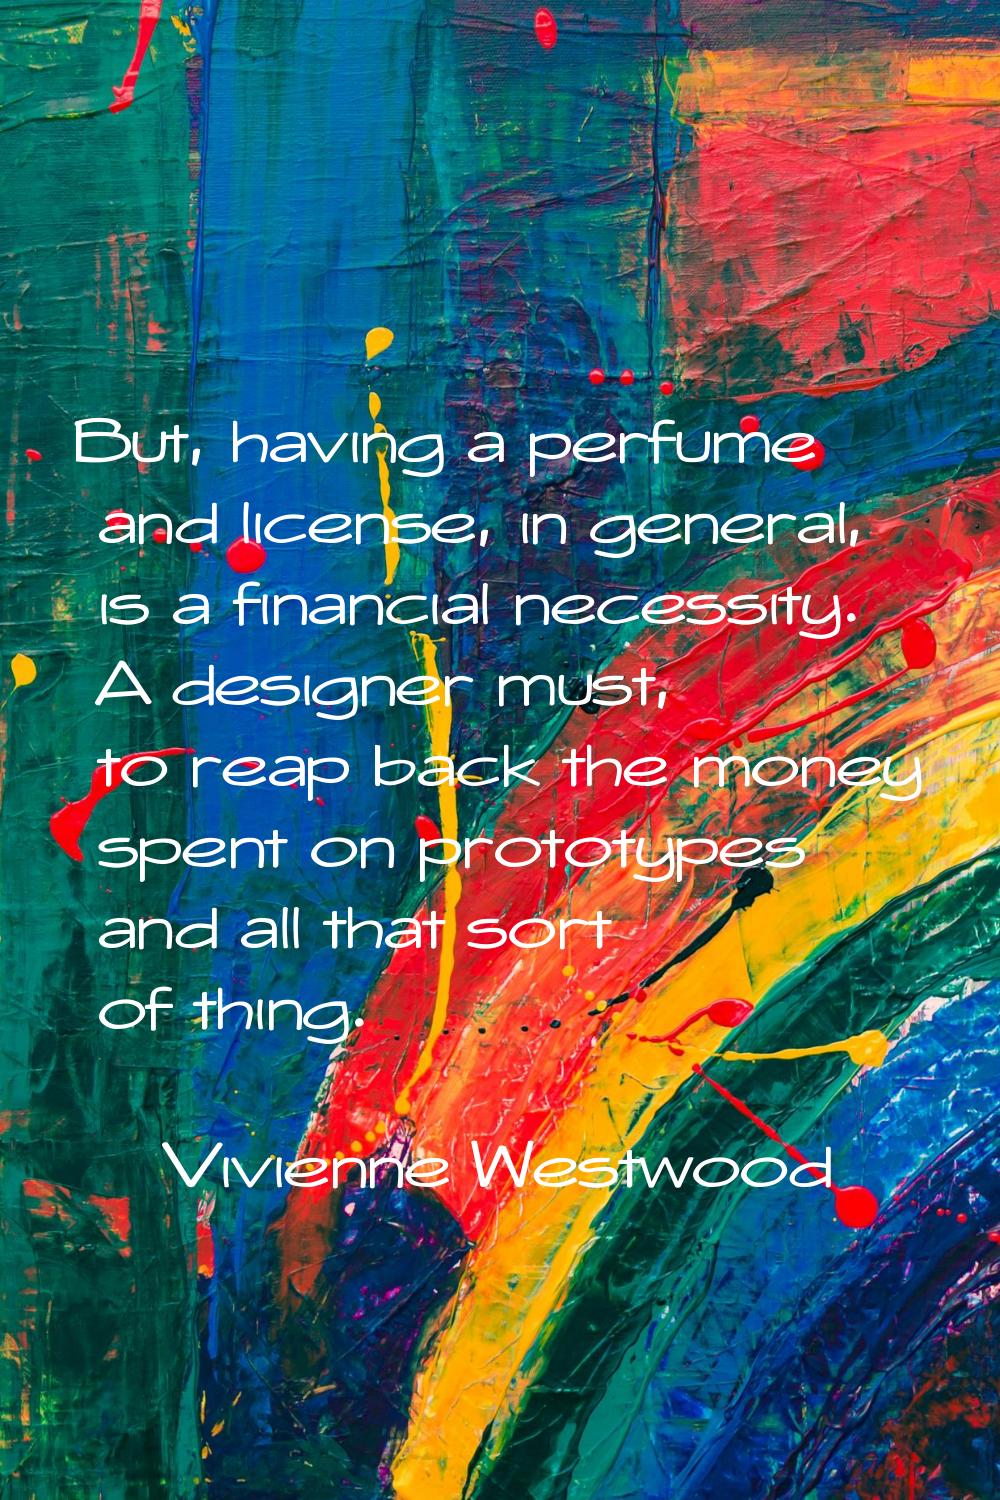 But, having a perfume and license, in general, is a financial necessity. A designer must, to reap b